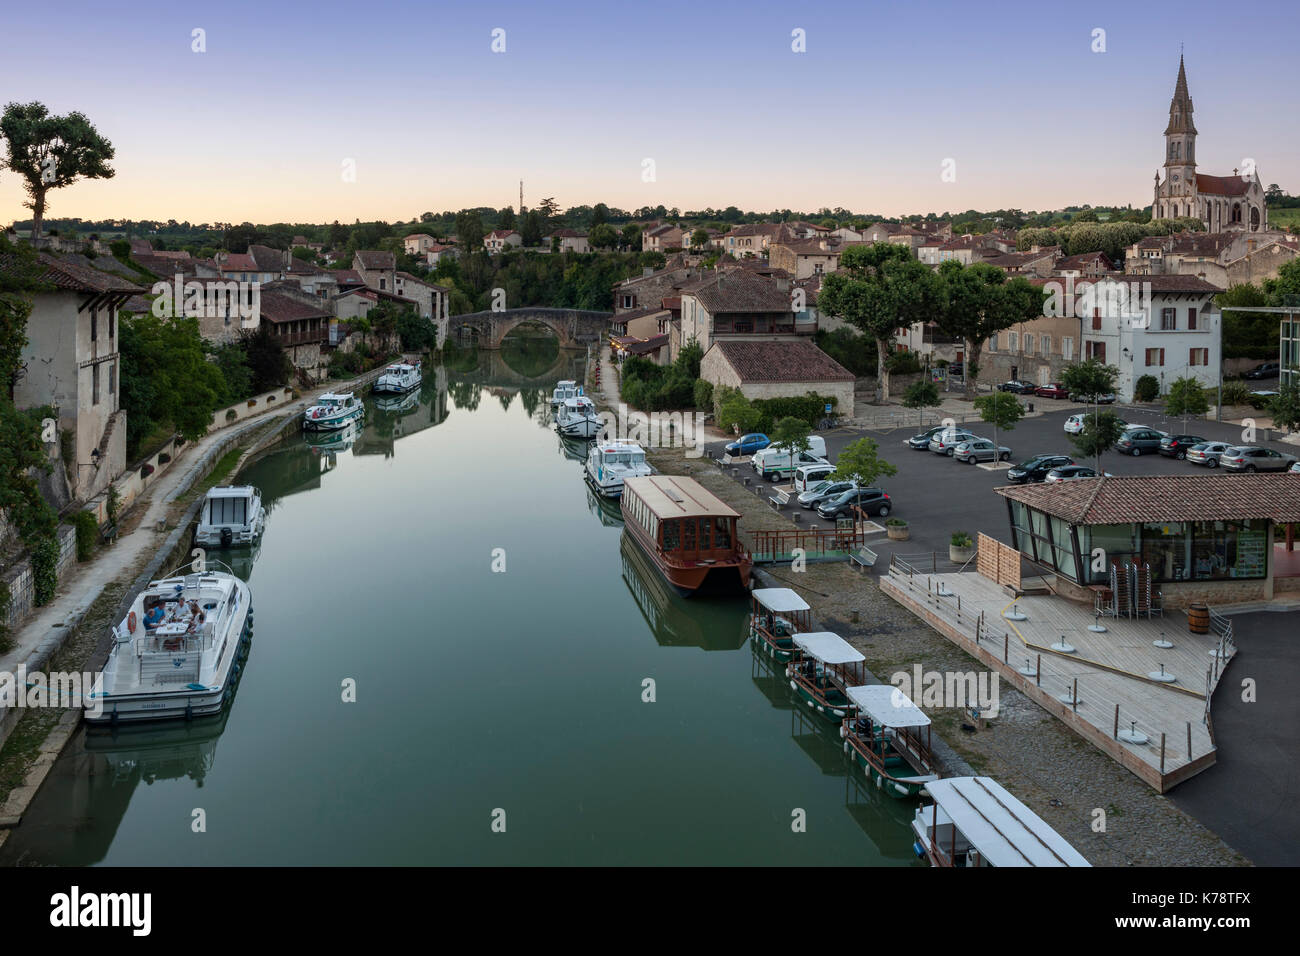 The town of Nérac and the Petite Baïse River in the Dordogne region of southwest France. Stock Photo